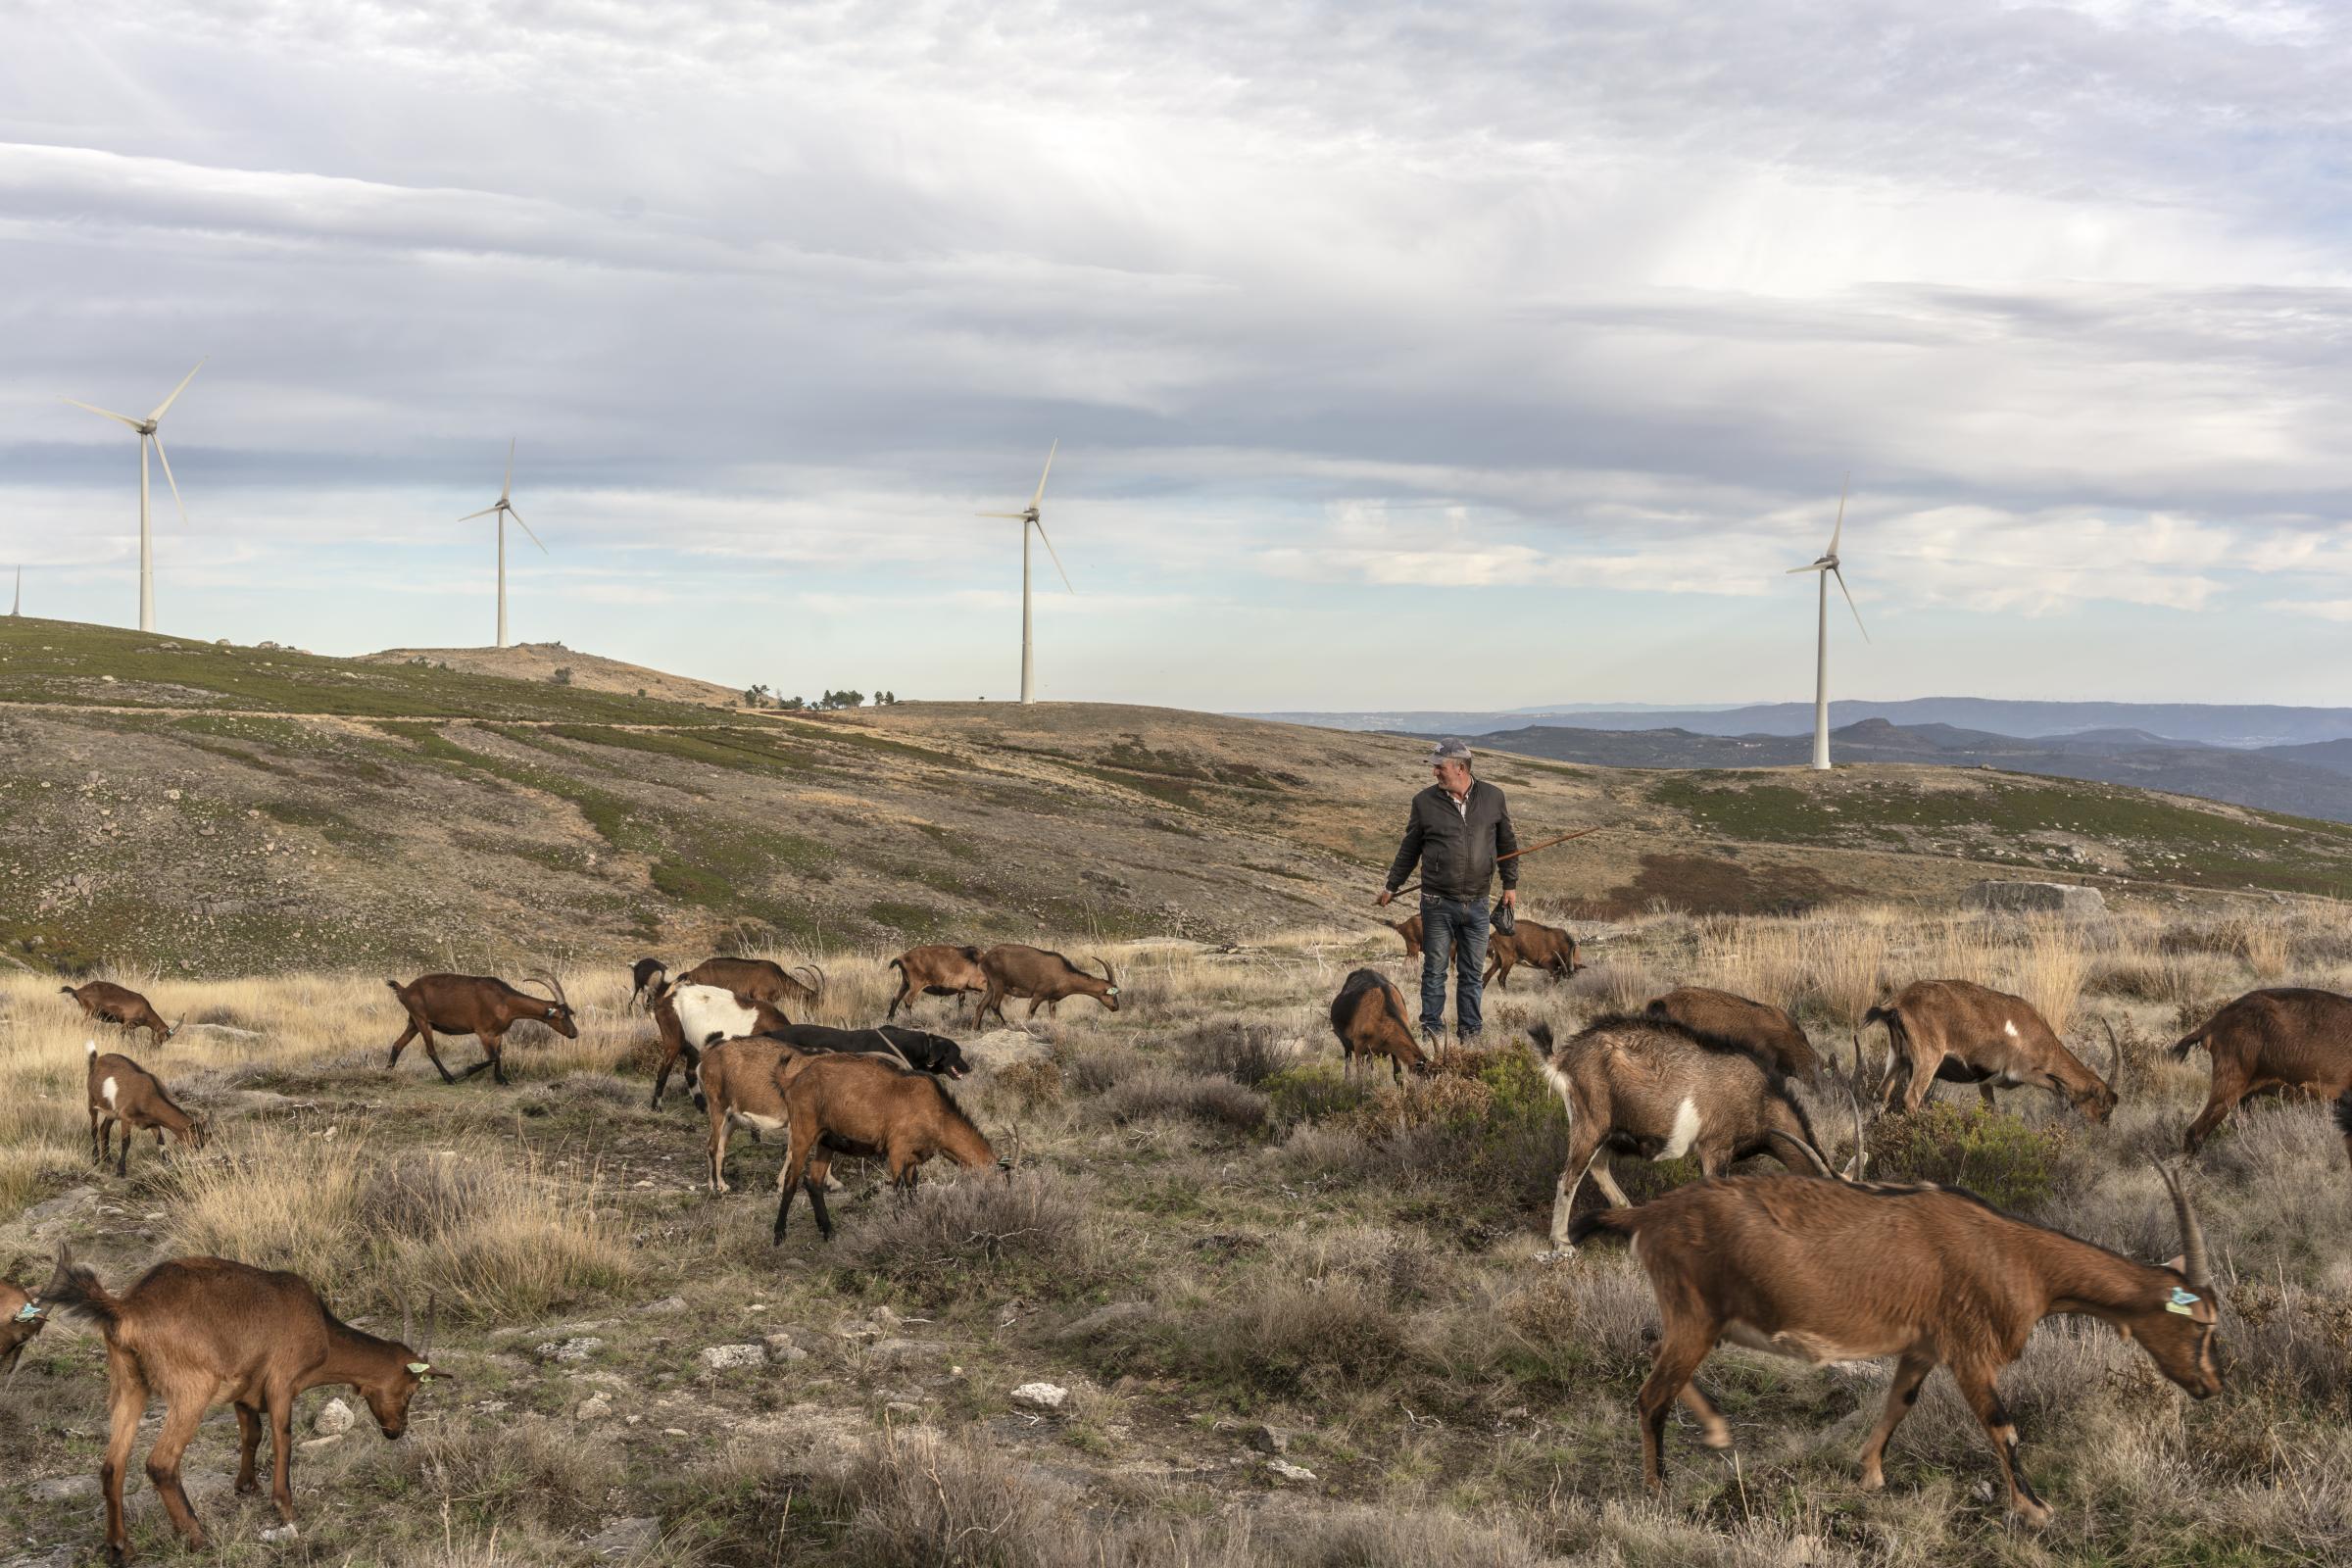 Cerdedo, October 23rd 2021 - Paulo das Cabras takes his 300 goats and sheep to graze among the wind turbines that dot the ridges of the hills of the Barroso region. He lives in Cerdedo, a village near Covas do Barroso, where the first of several lithium mines planned for the area faces stiff resistance from residents. The mines are part of a strategy by the Portuguese government trying to attract electric car batteries manufacturers to the country, a step it claims to be necessary to fulfill the country&rsquo;s decarbonization targets. The Tr&aacute;s os Montes region of Portugal, of which the Barroso region is part, produces 25% of the renewable energy consumed by the country. Little of the revenue generated by this industry stays there, which is the poorest region in the country